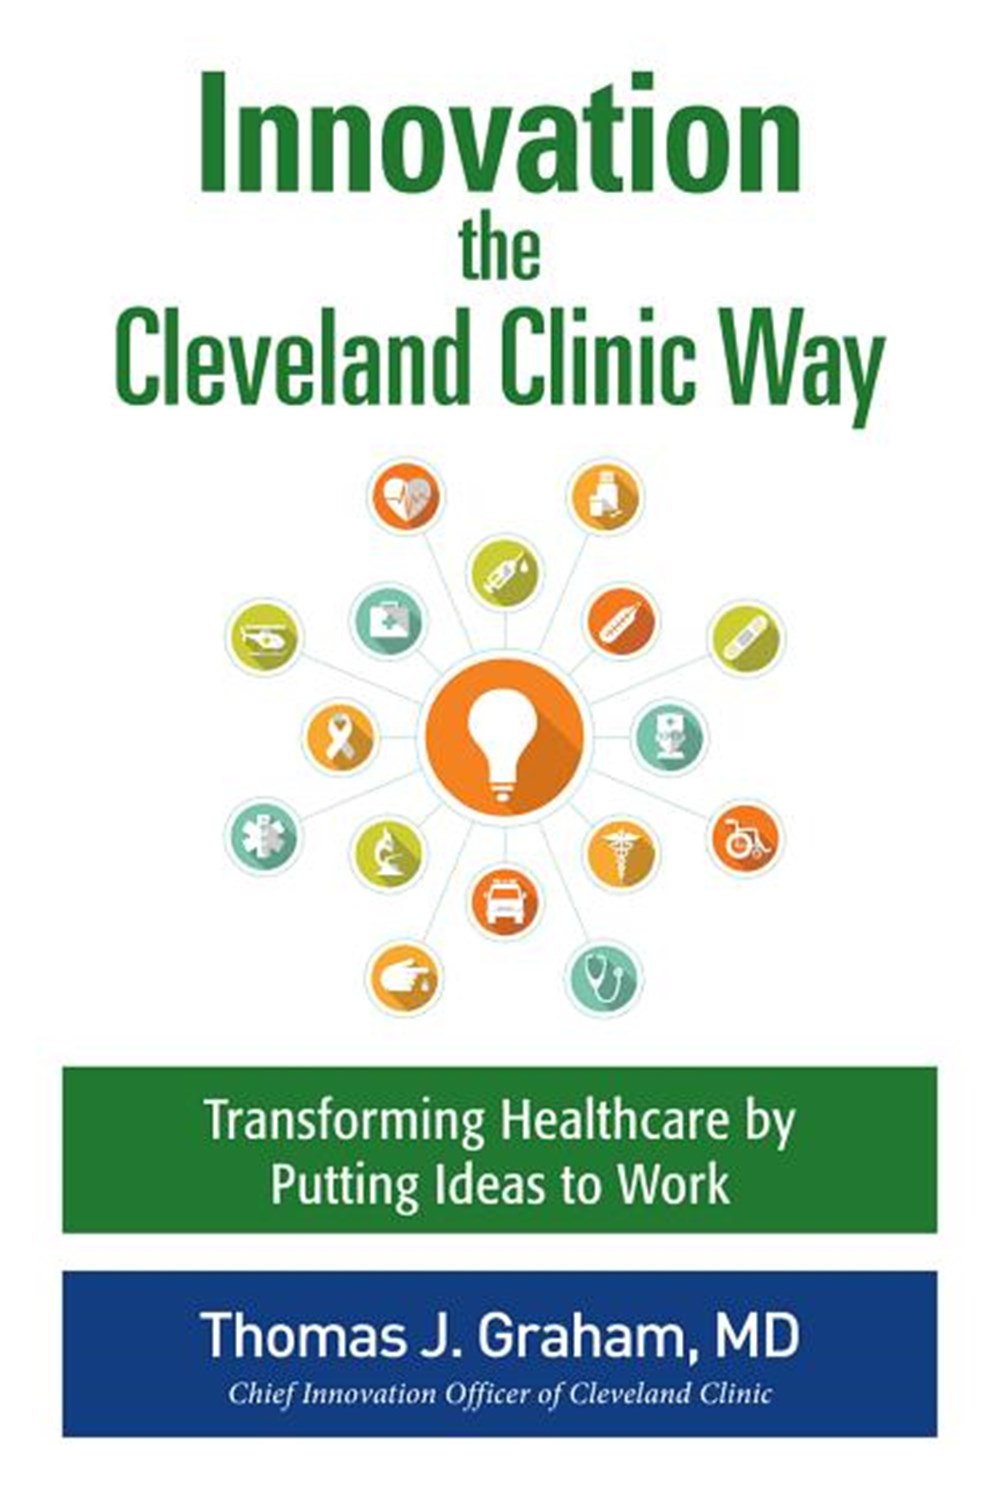 Innovation the Cleveland Clinic Way Powering Transformation by Putting Ideas to Work